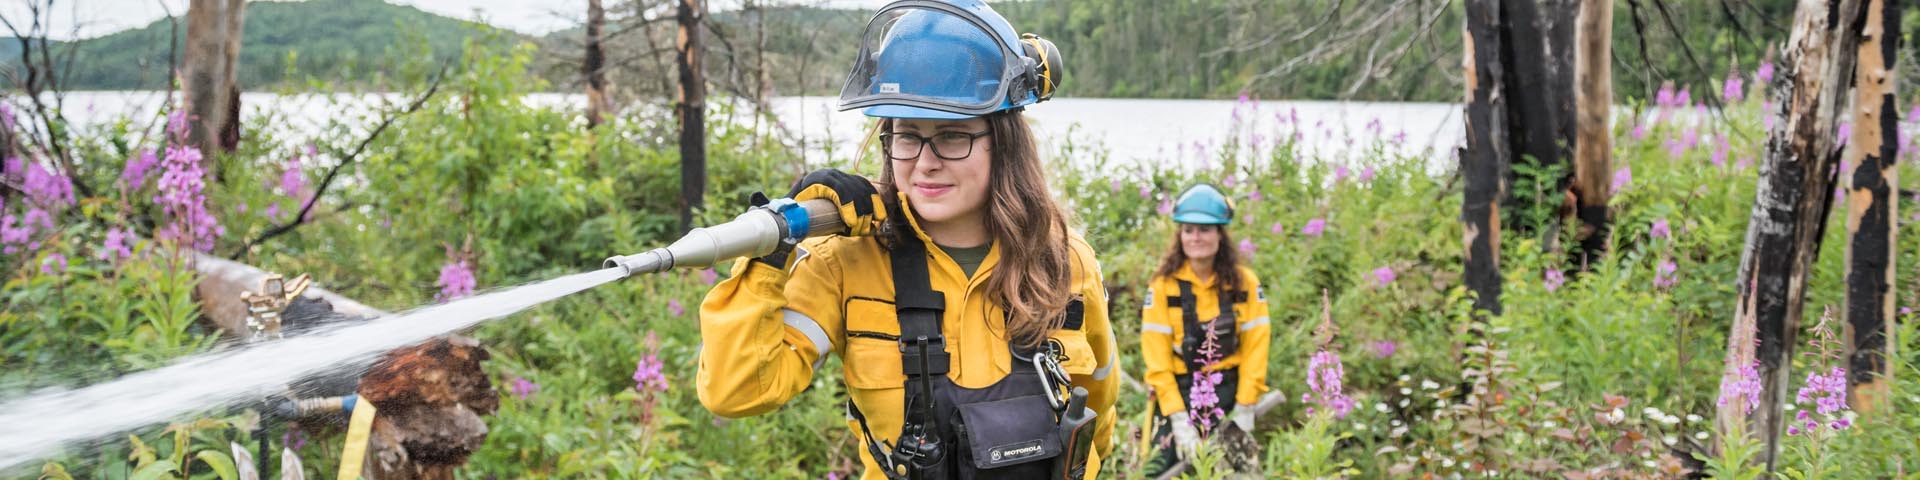  Firecrew member watering the edge of a prescribed burn site at Hattie Cove, Pukaskwa National Park